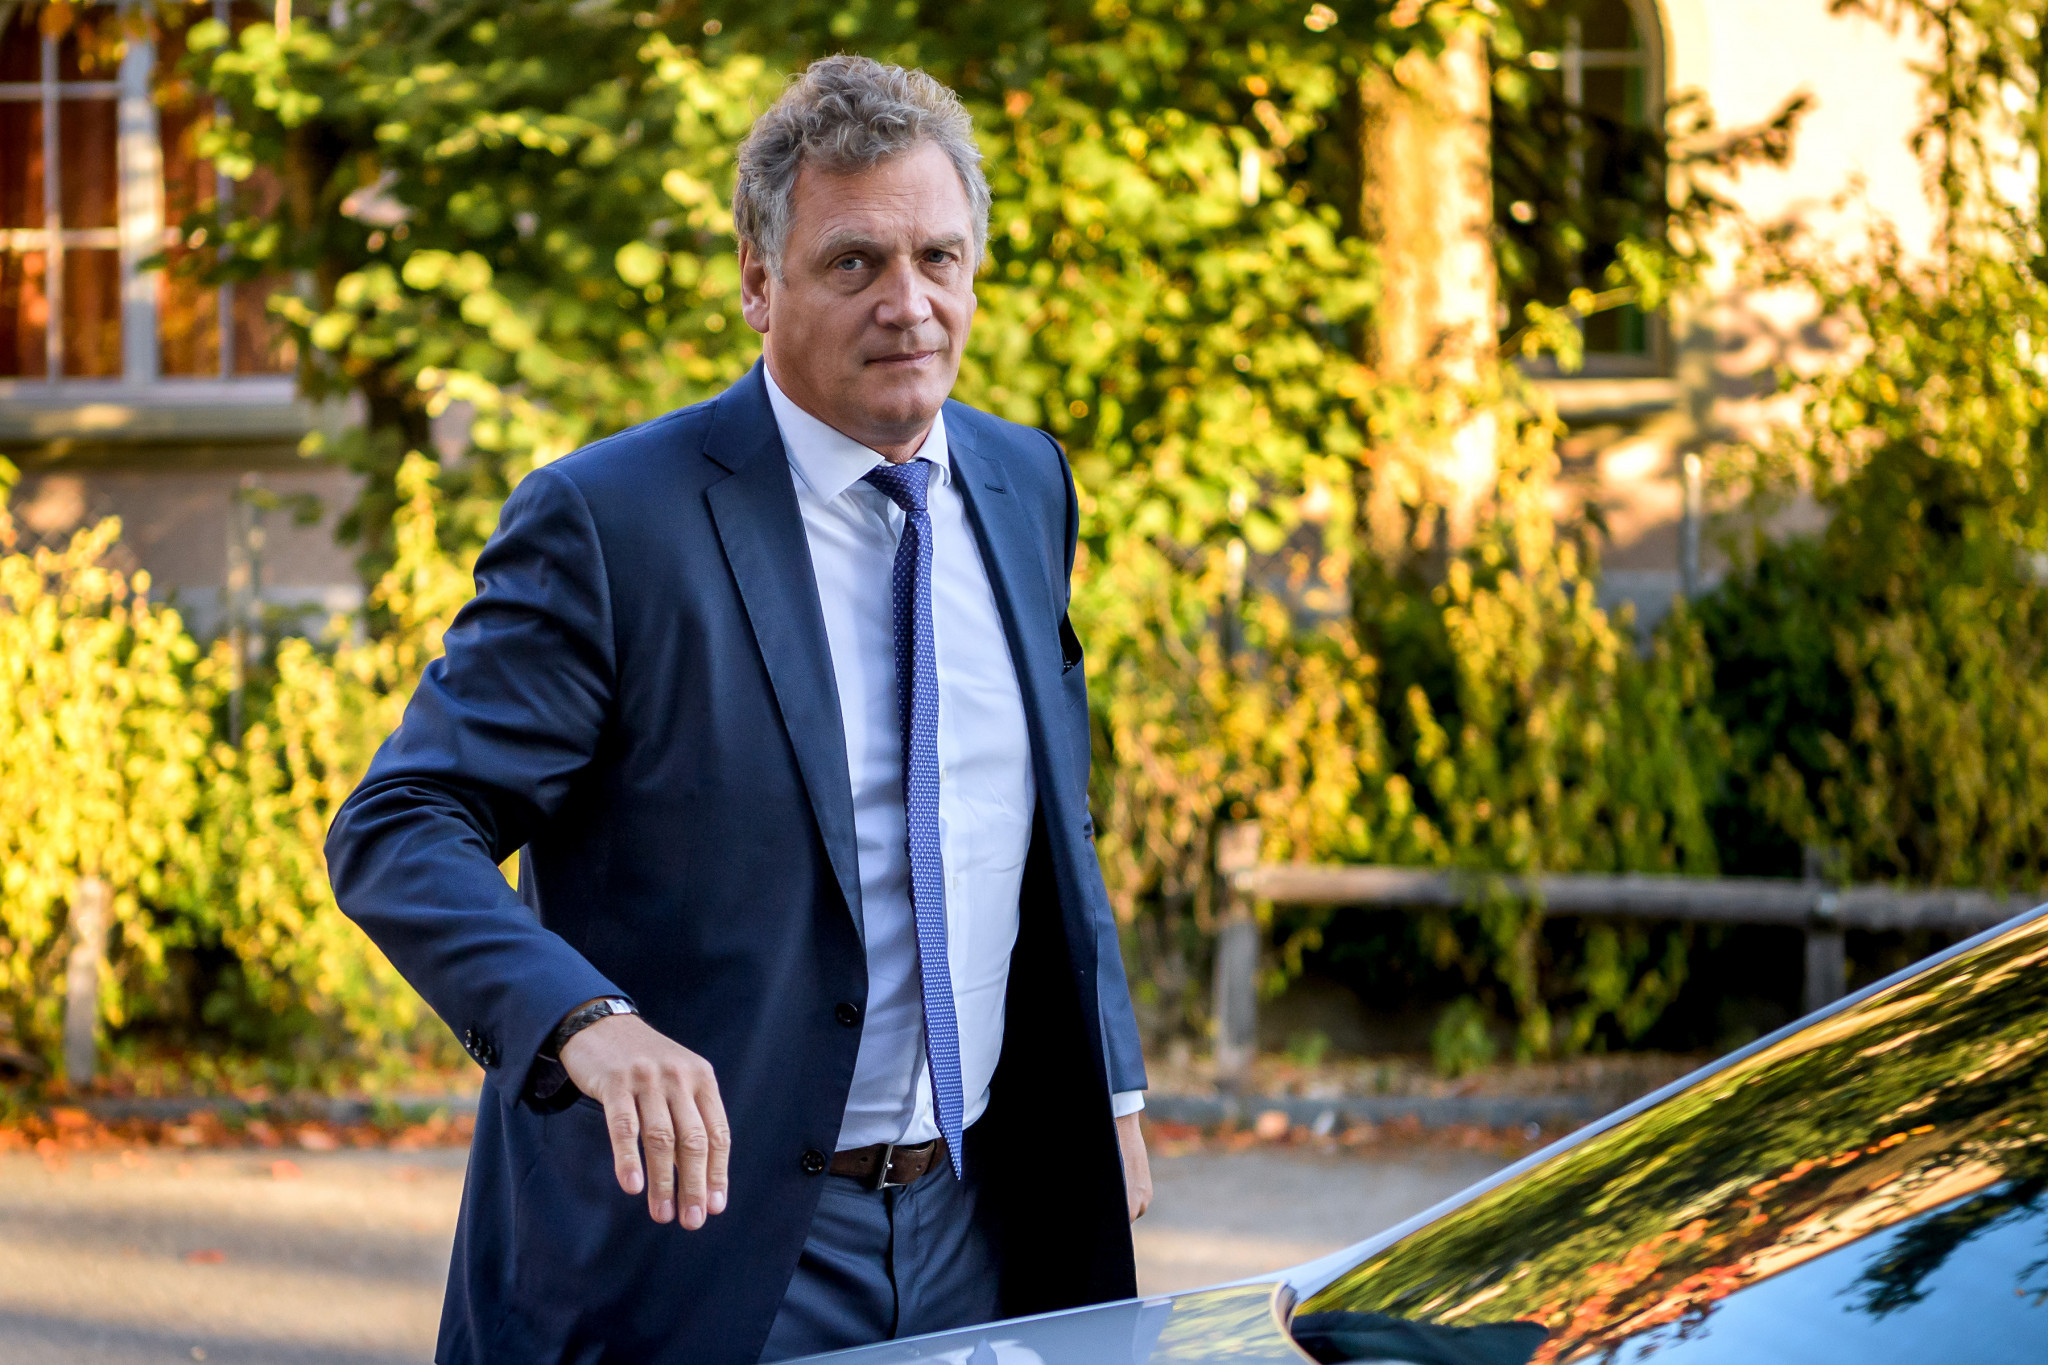 Jérôme Valcke has been accused of accepting bribes, several counts of aggravated criminal mismanagement and falsification of documents ©Getty Images